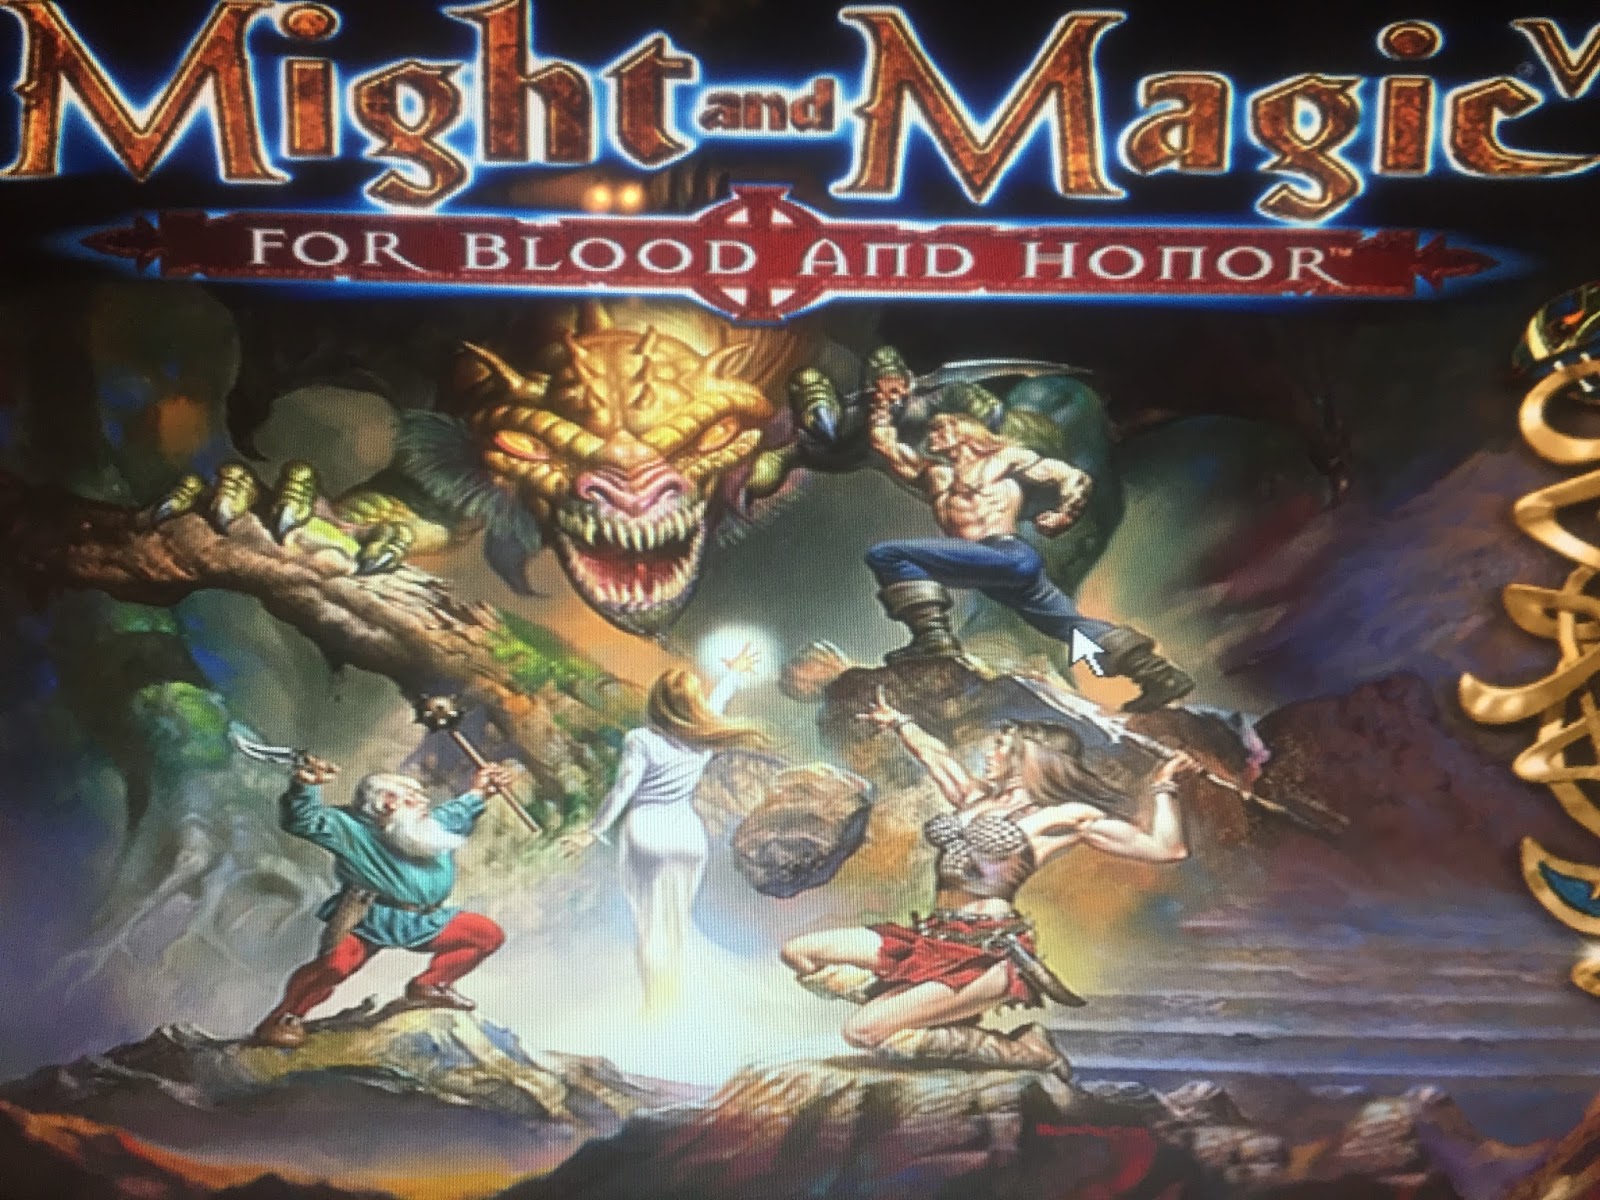 Magic 7.0. Might and Magic VII: for Blood and Honor (1999). Might and Magic VII for Blood and Honor. Меч и магия 7 сила и честь. Might and Magic 7 for Blood and Honor.